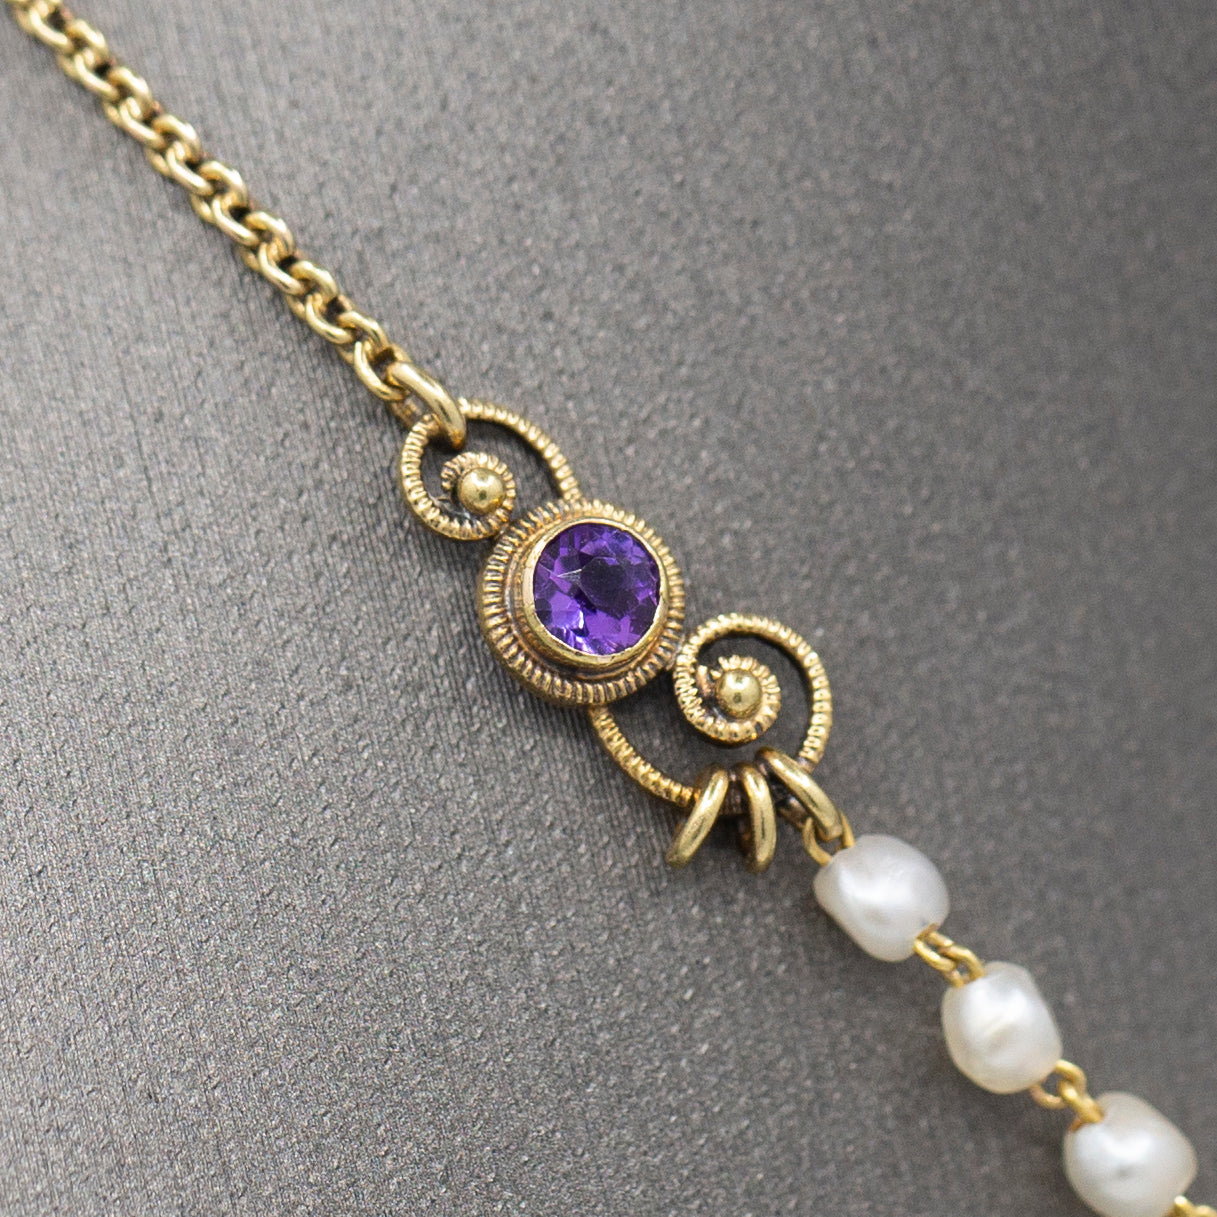 Antique Victorian Amethyst and Seed Pearl Pendant Necklace in 14k Yellow Gold